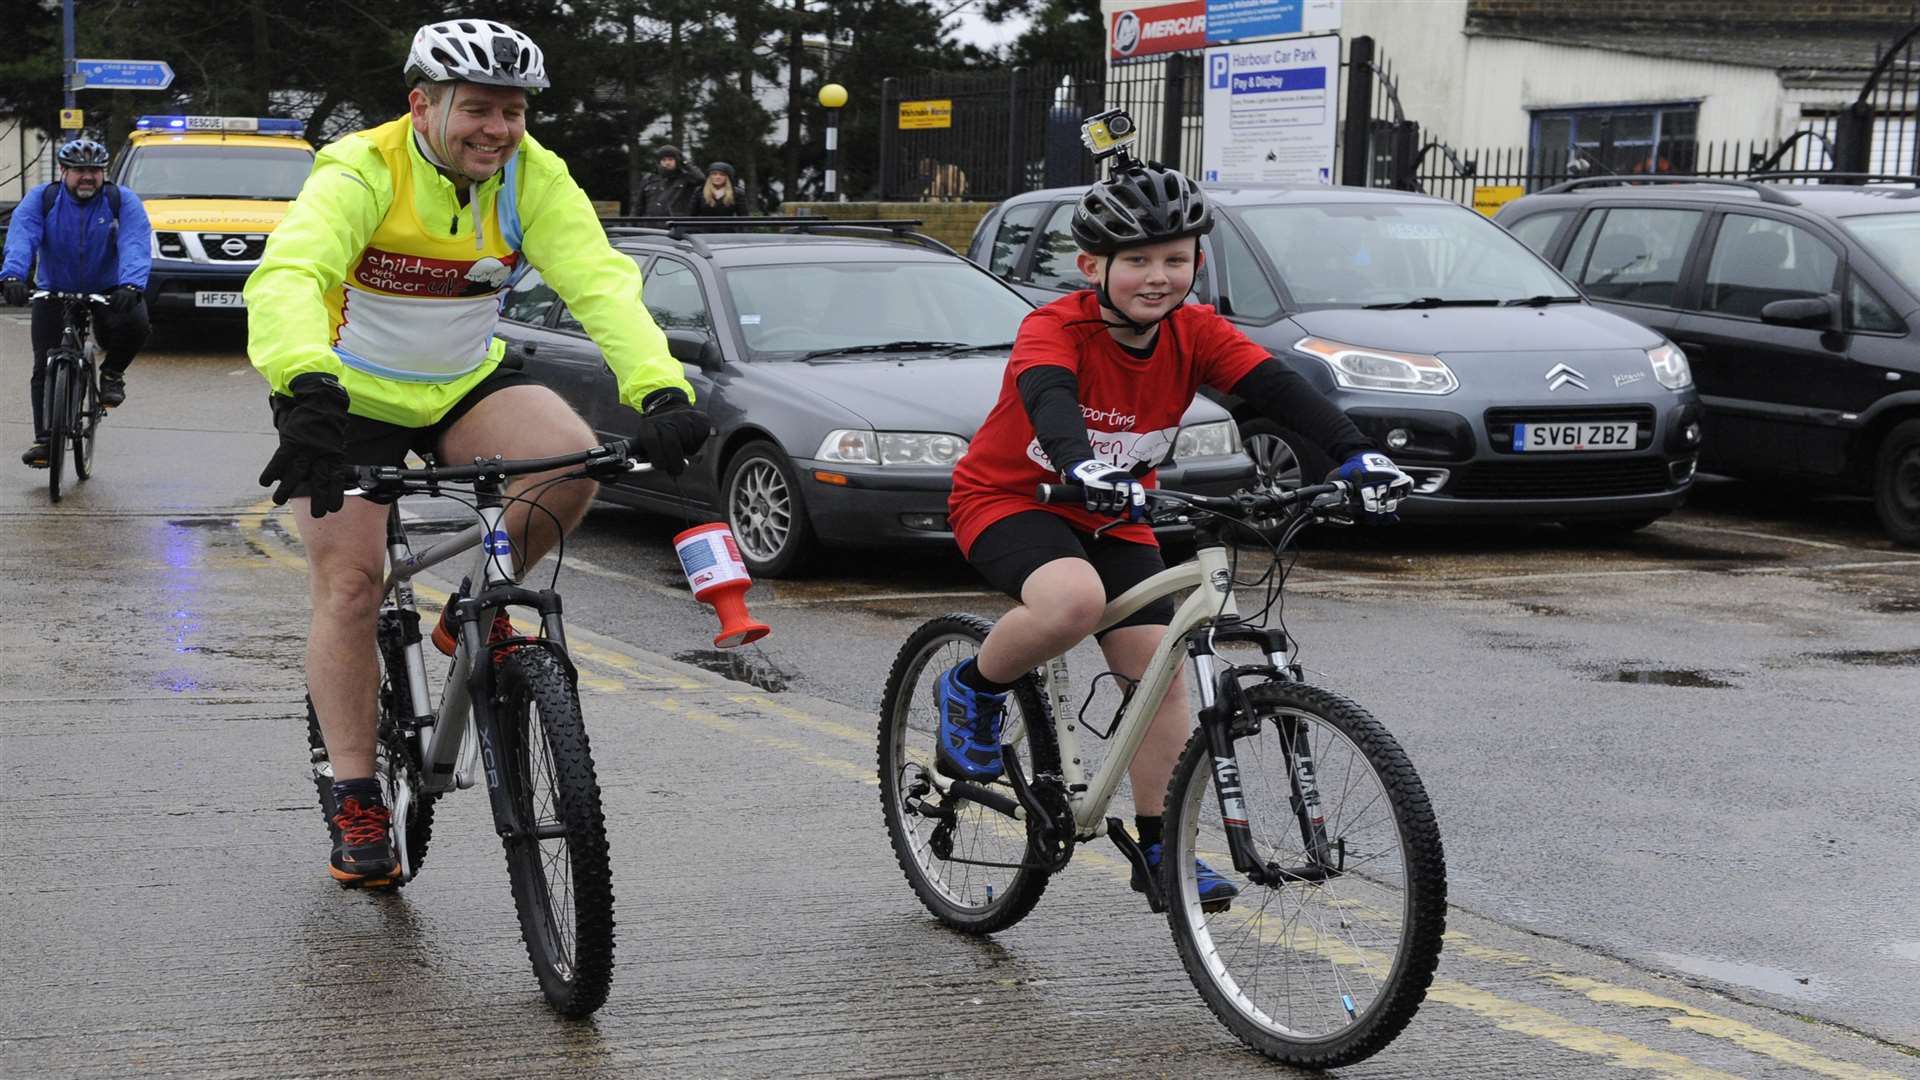 Ten-year-old Josh Stickels cycles from Herne Bay to Whitstable for charity with his dad Matt